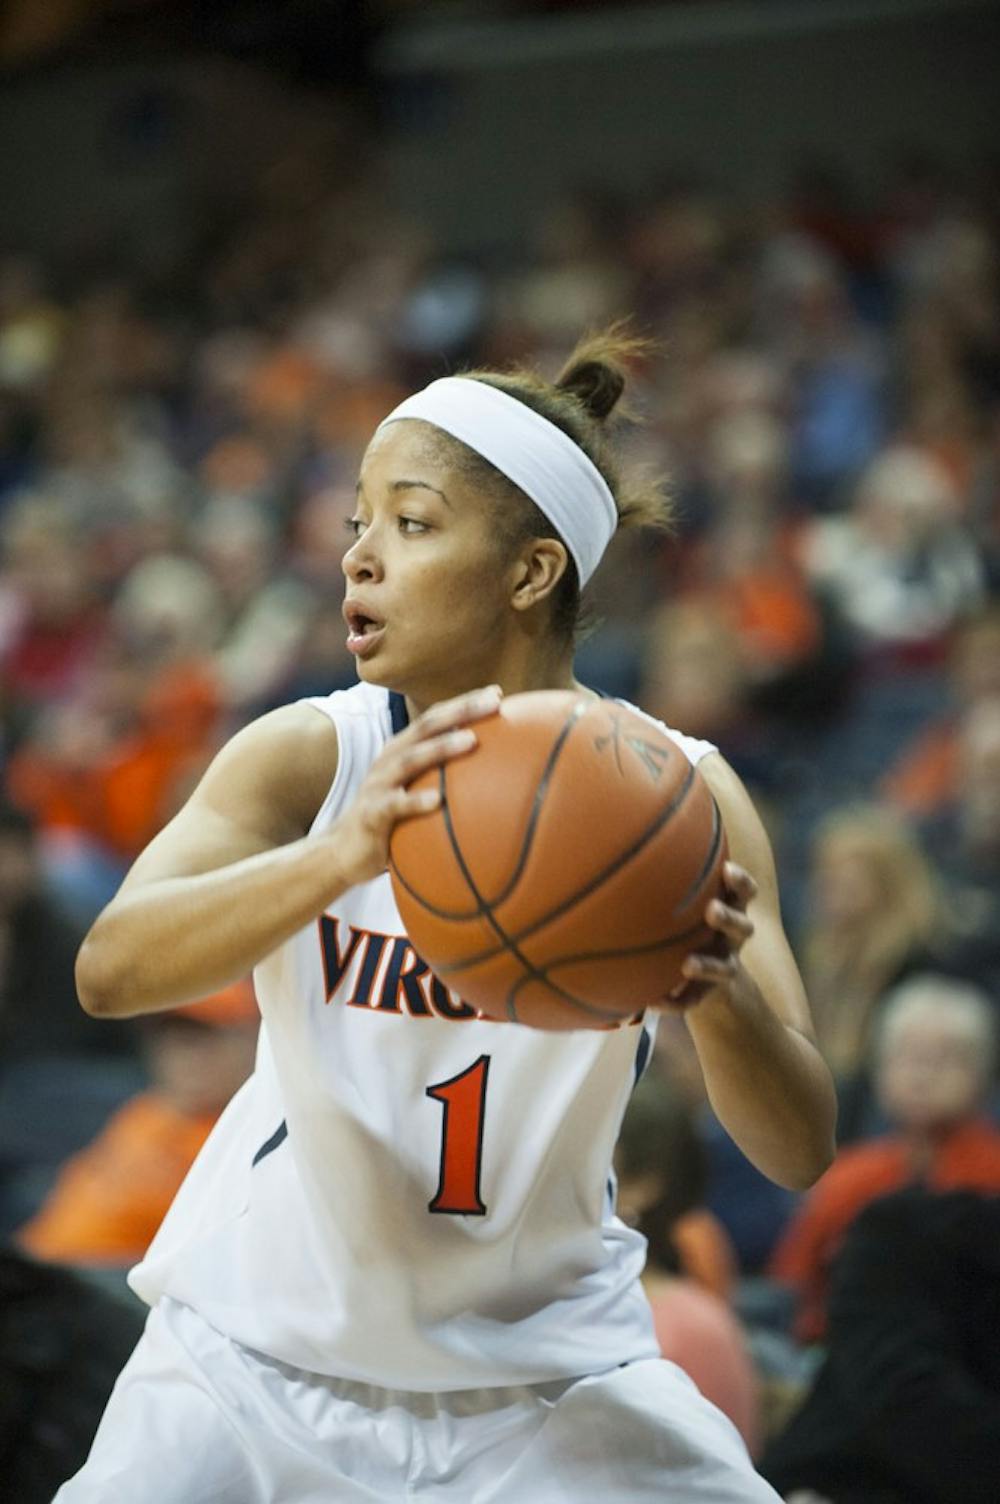 <p>Sophomore point guard Mikayla Venson finished 9-for-18 from the field and scored 15 points in the fourth quarter, but her team dropped its third game in a row.&nbsp;</p>